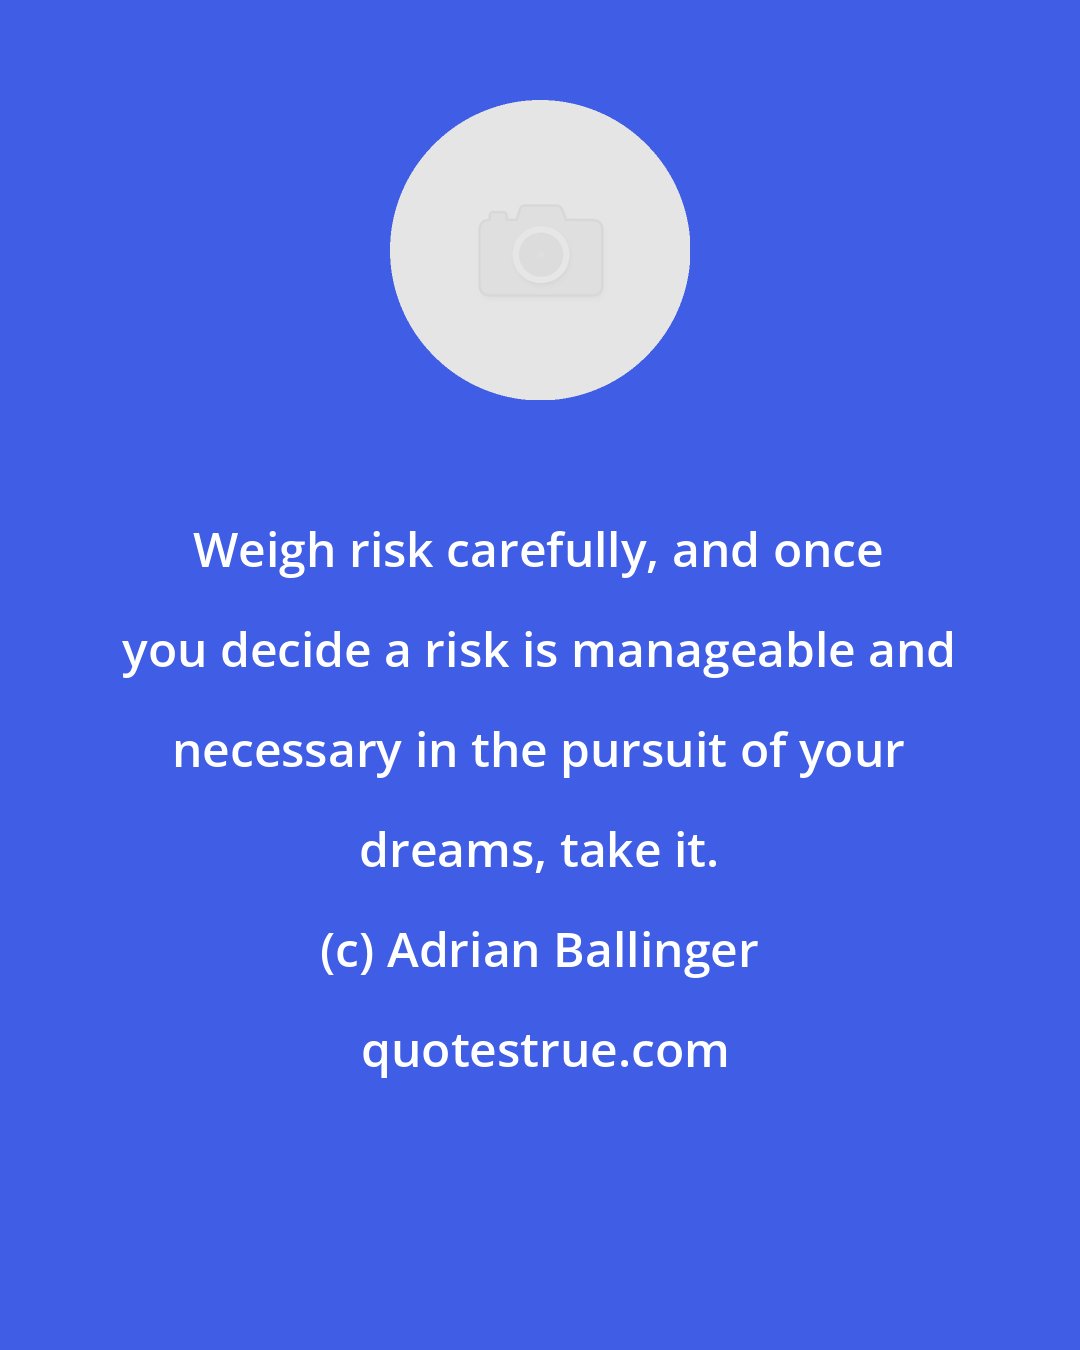 Adrian Ballinger: Weigh risk carefully, and once you decide a risk is manageable and necessary in the pursuit of your dreams, take it.